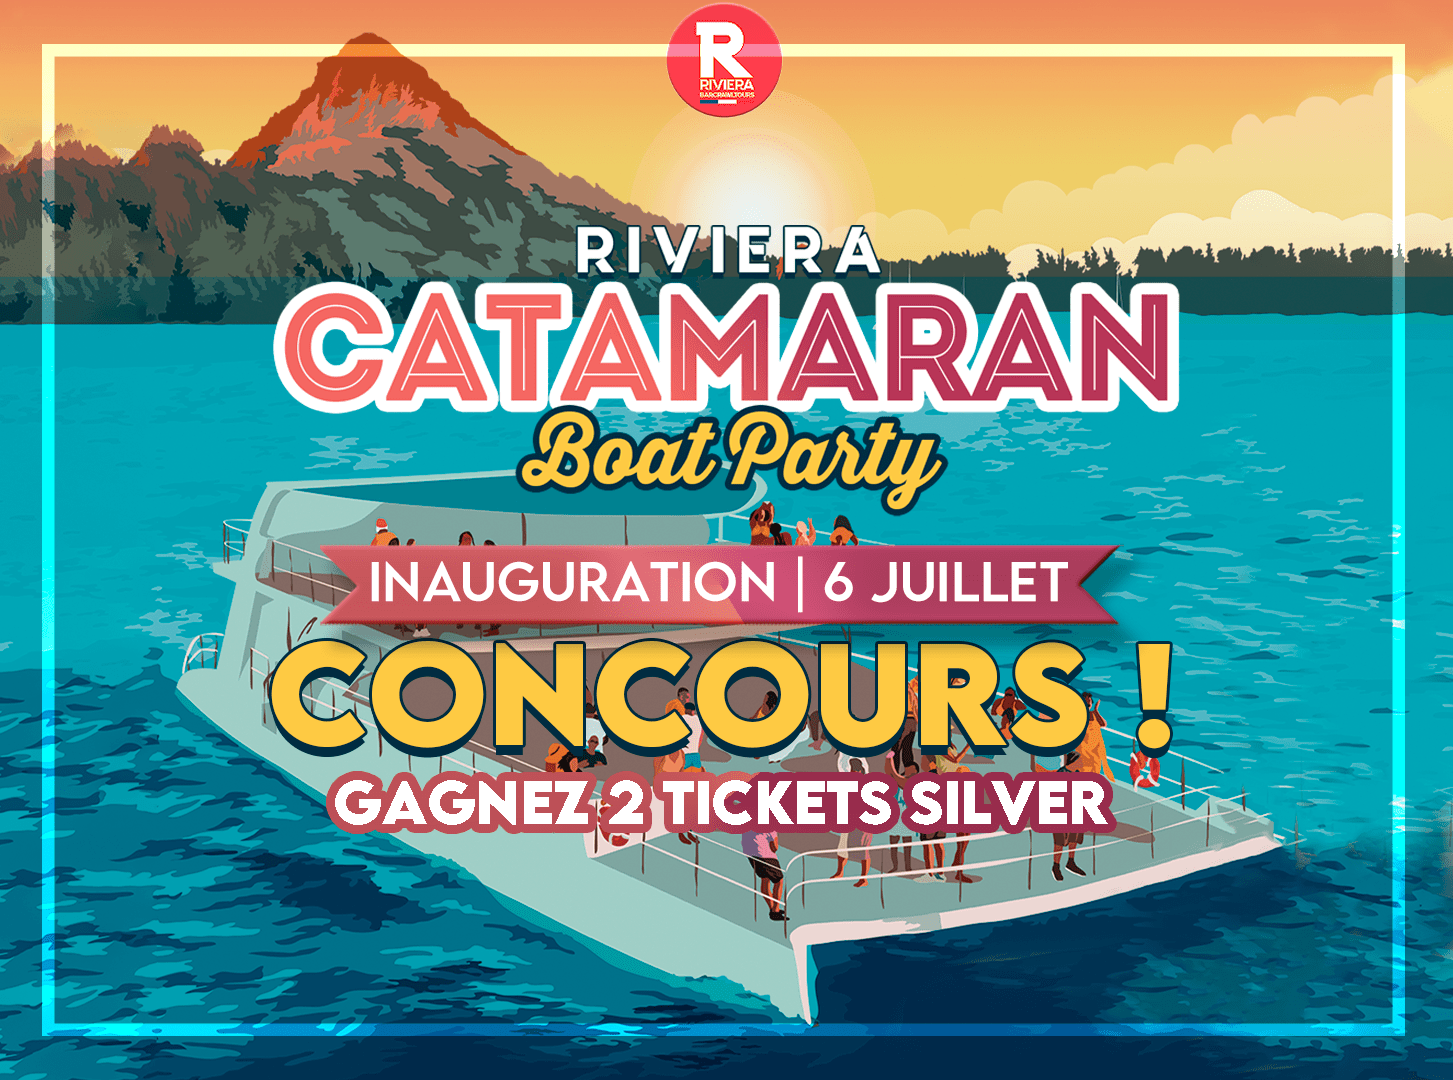 Concours inauguration rivieraboatparty